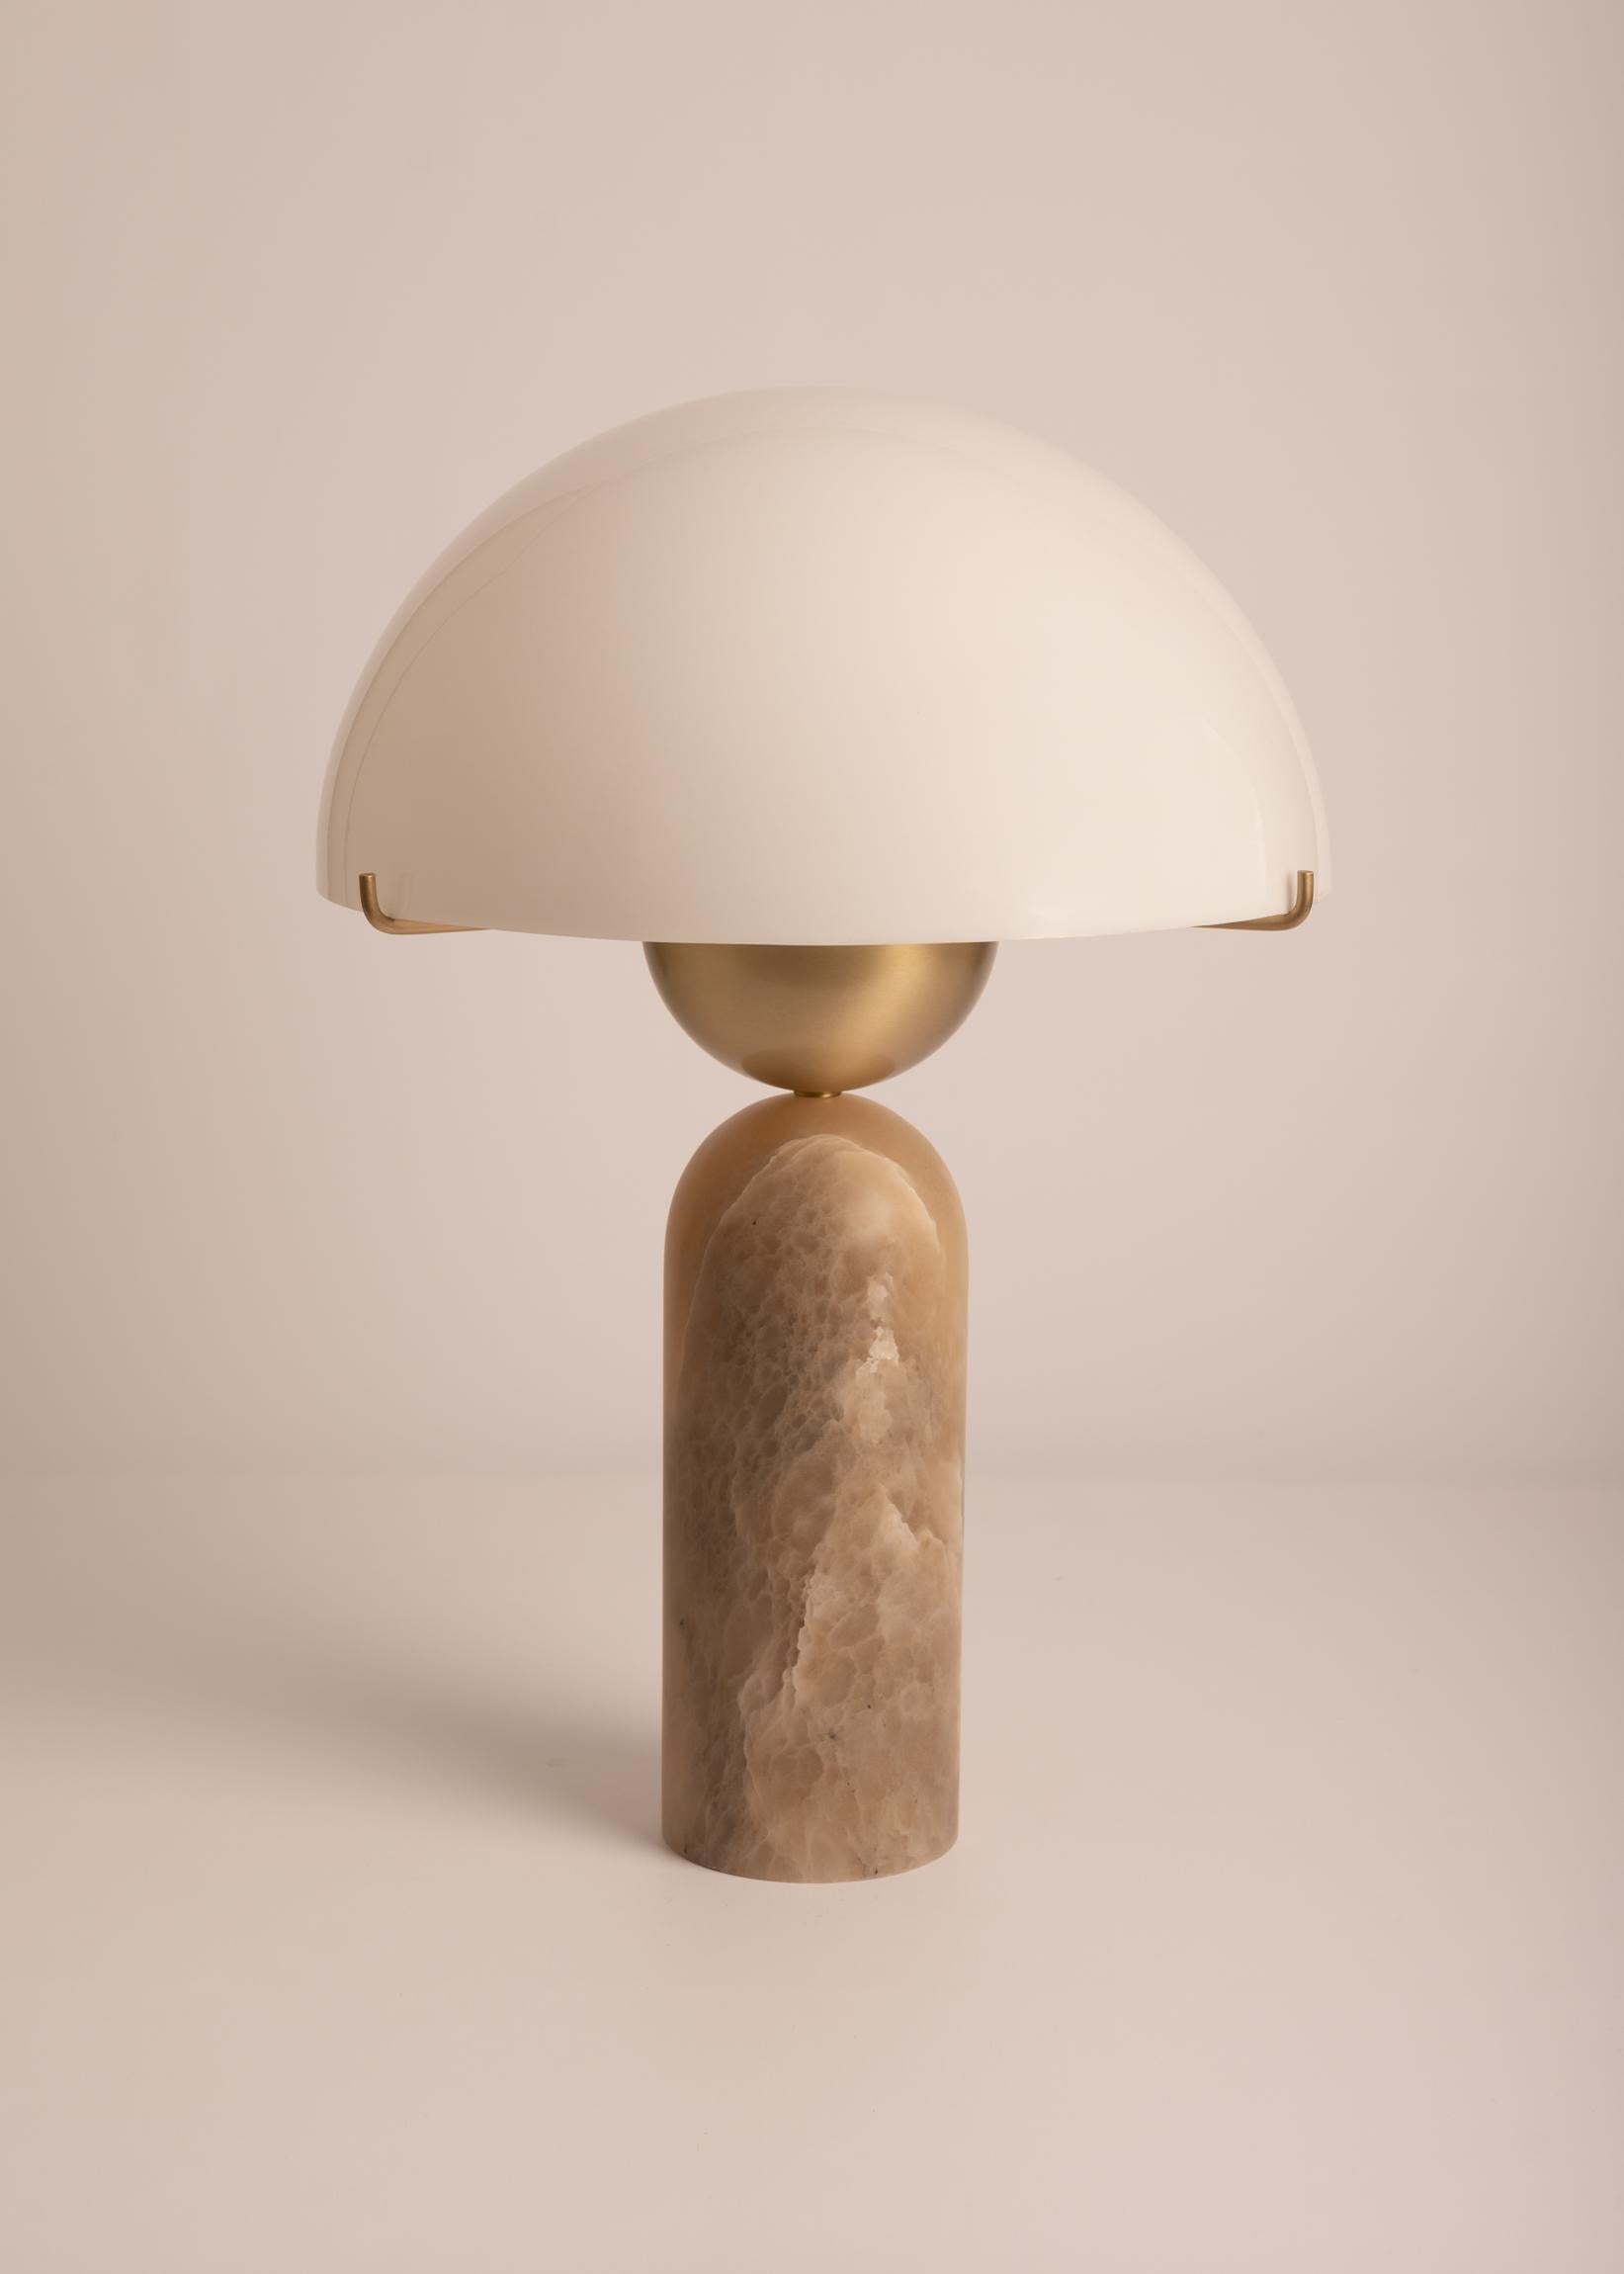 Tobacco Alabaster Peono Table Lamp by Simone & Marcel
Dimensions: Ø 40.6 x H 56 cm.
Materials: Brass, acrylic and tobacco alabaster.

Also available in different marble, wood and alabaster options and finishes. Custom options available on request.